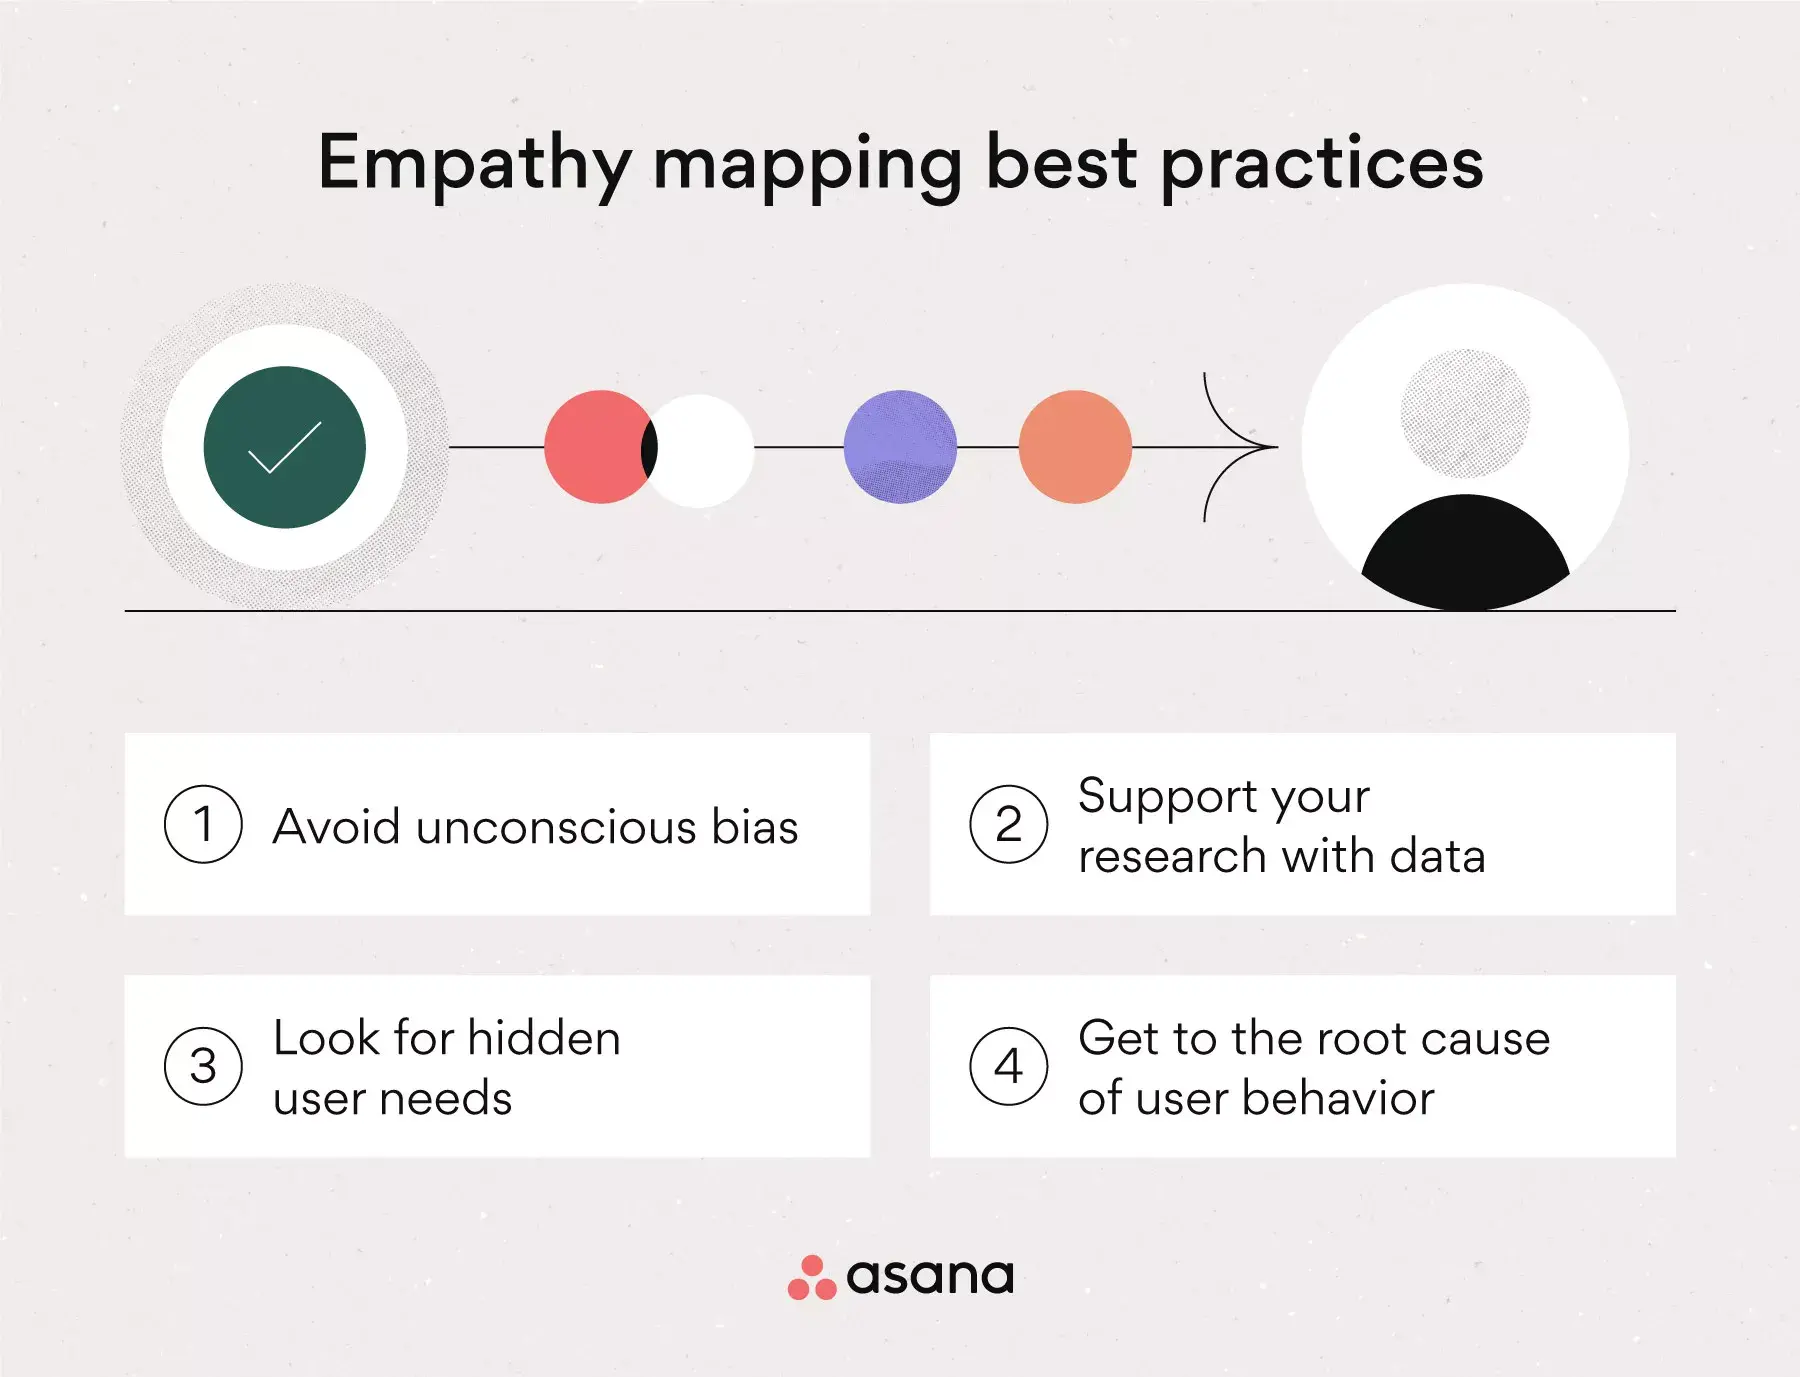 [inline illustration] Empathy mapping best practices (infographic)